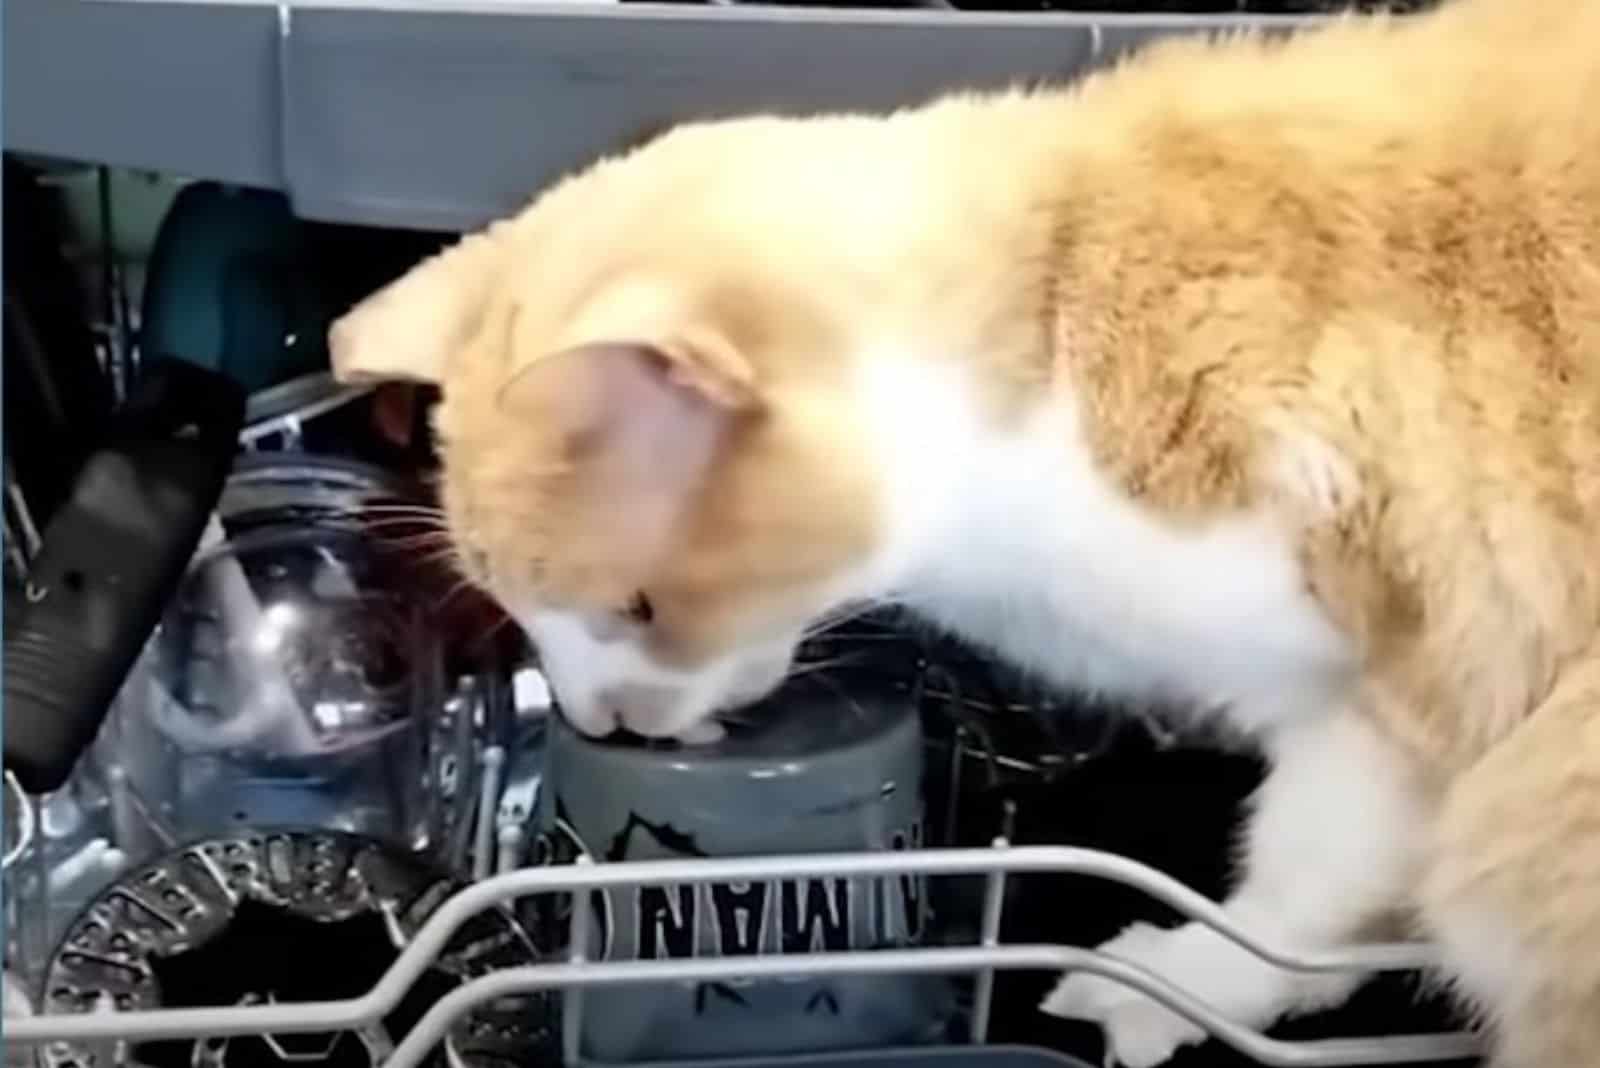 Trekkie the cat sniffing on dishes